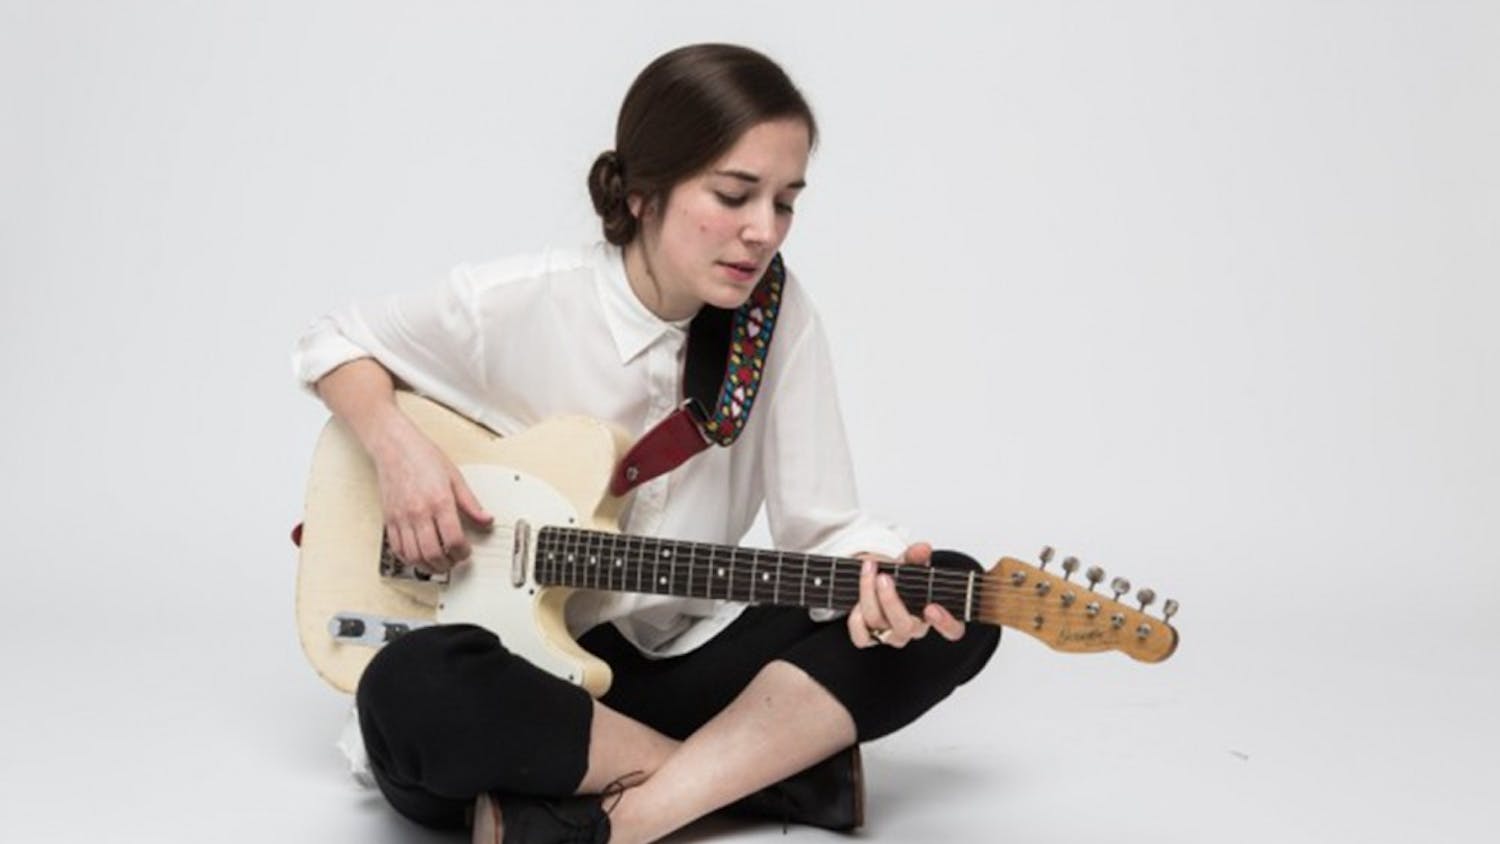 Margaret Glaspy will debut her album "Emotions and Math" in June, and is visiting to share her music with Bloomington music lovers Thursday at The Bishop.